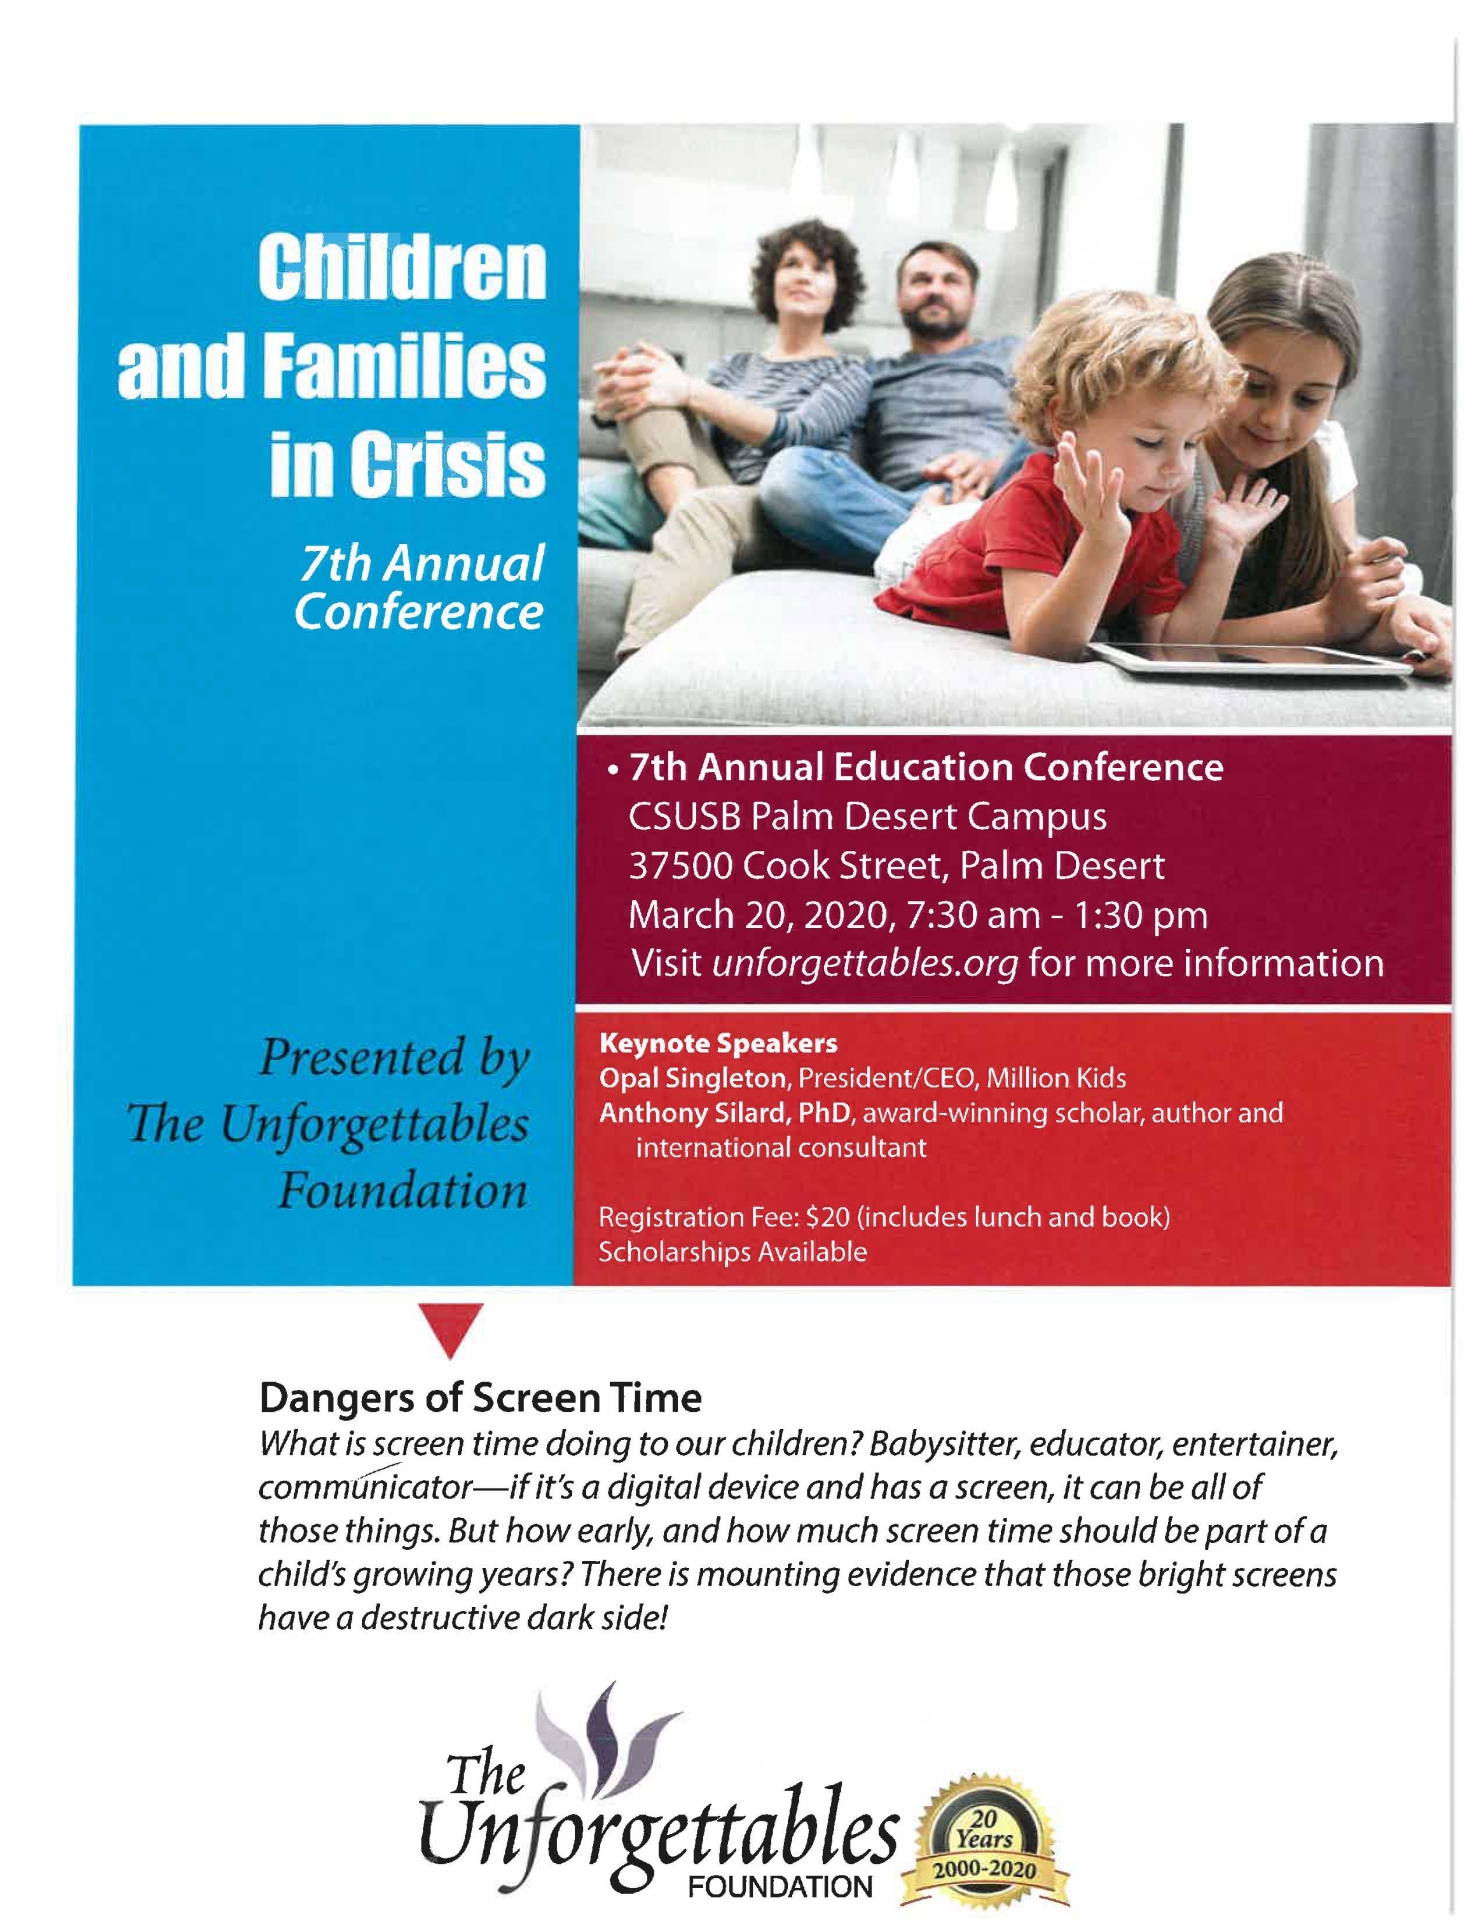 Families in Crisis event